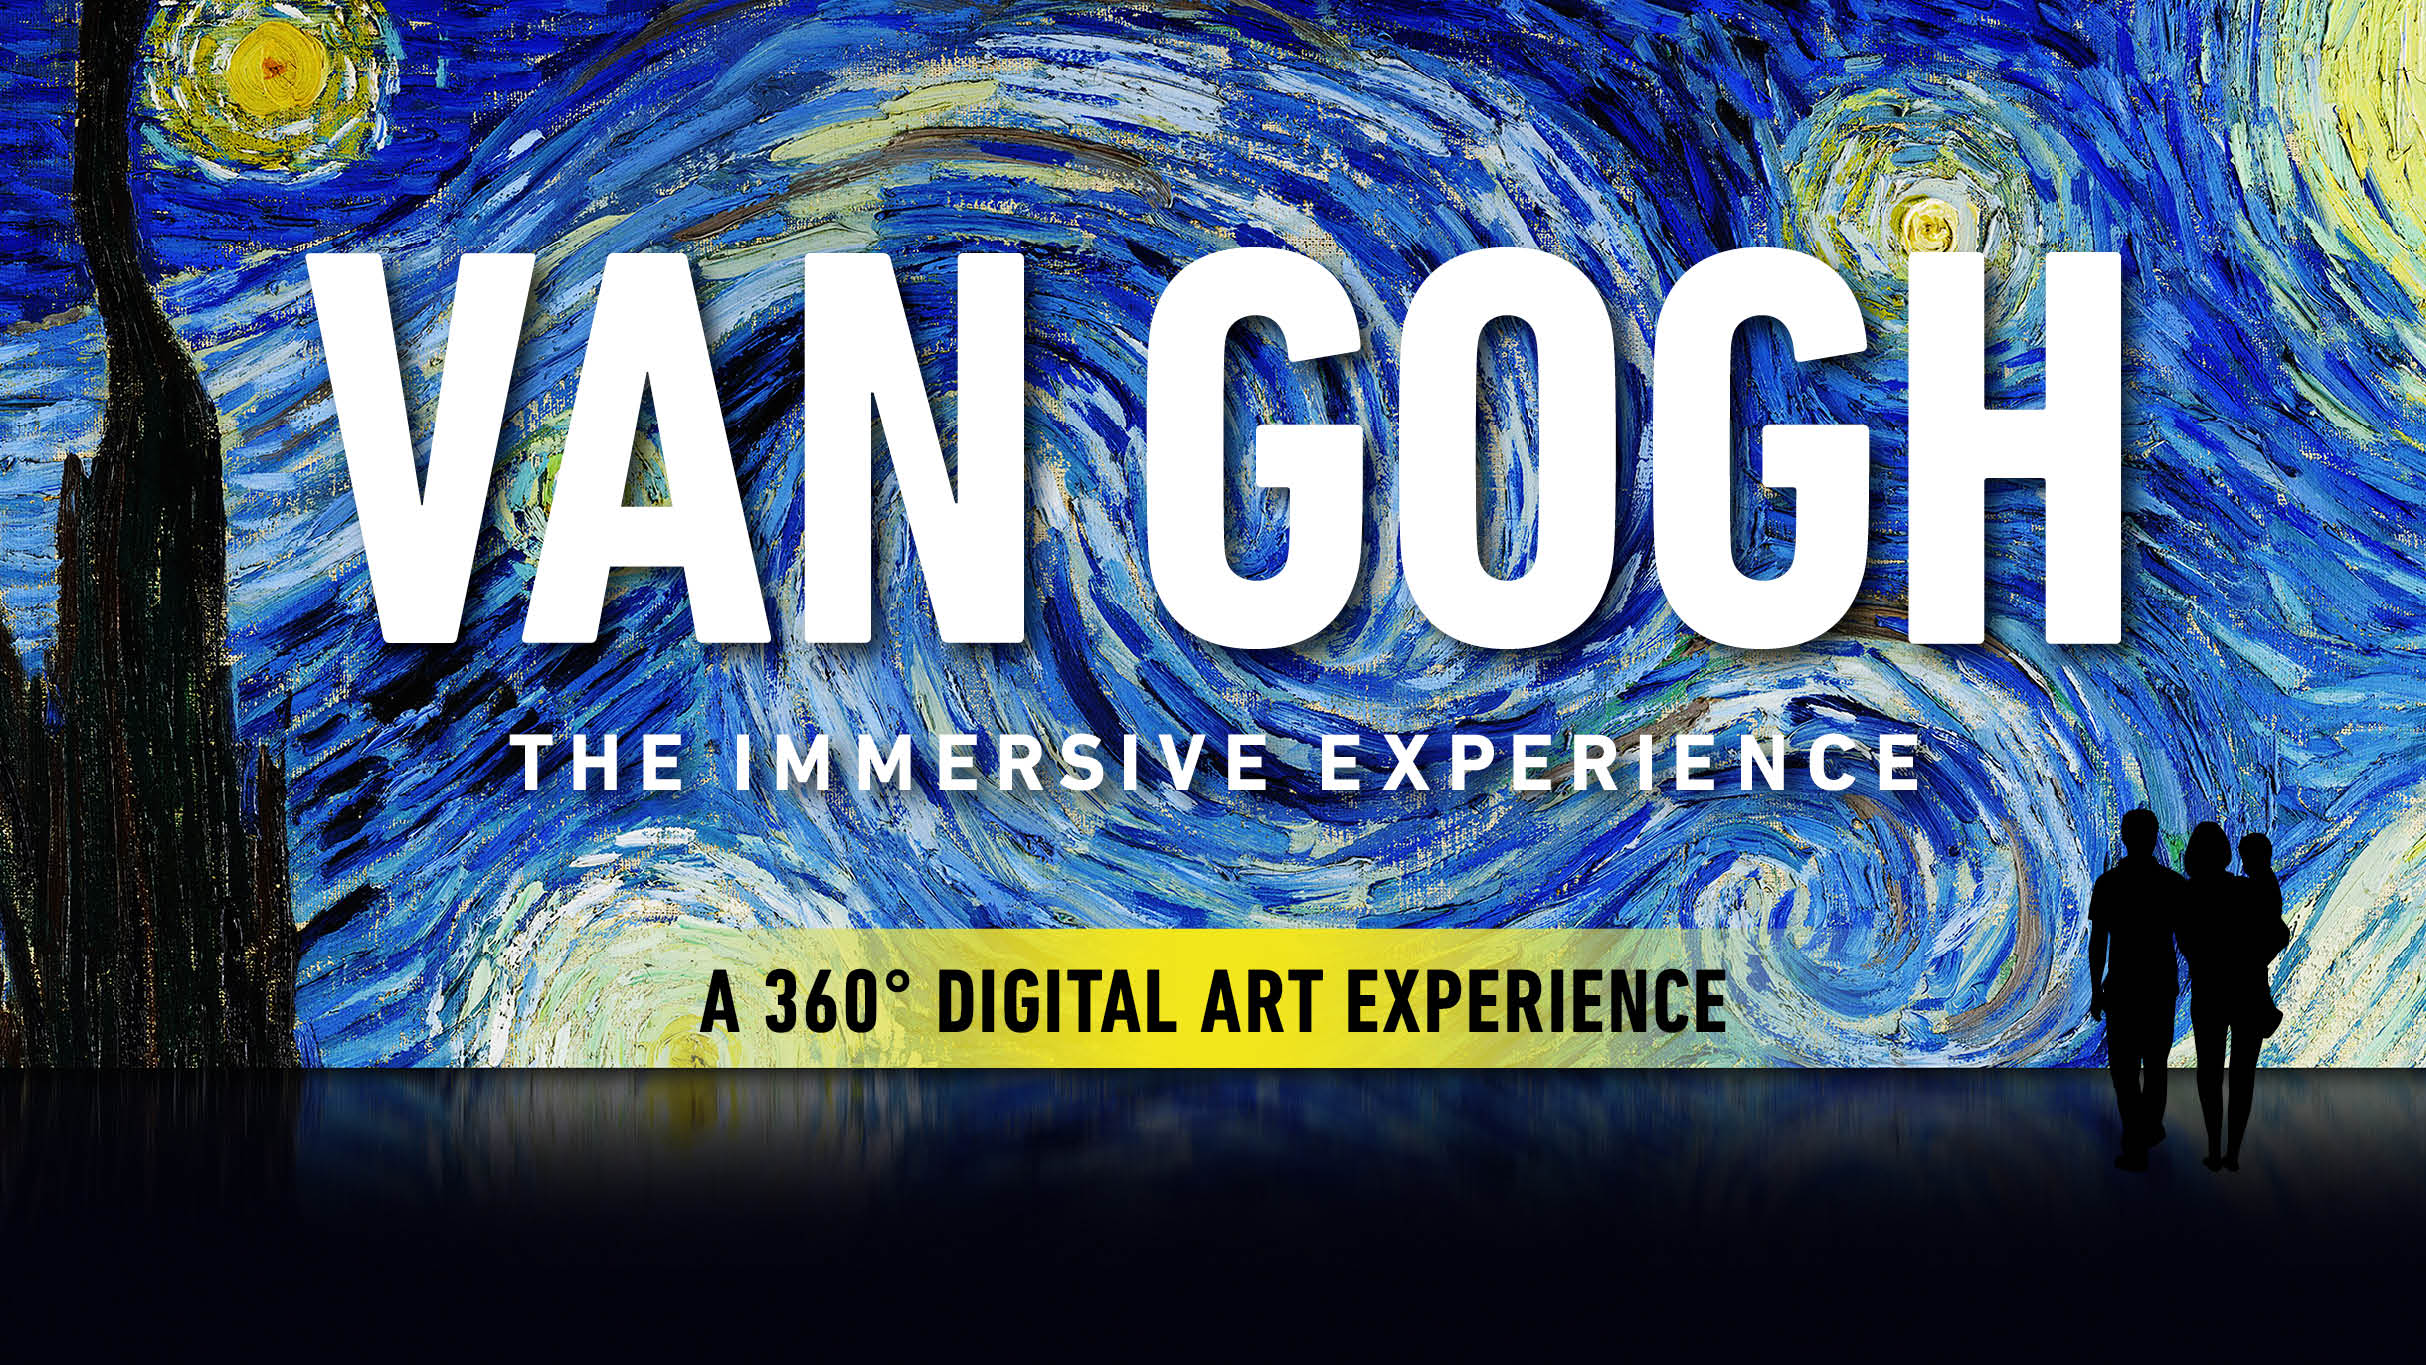 Image name Van Gogh The Immersive Experience at York St Marys York the 4 image from the post Events in Yorkshire.com.